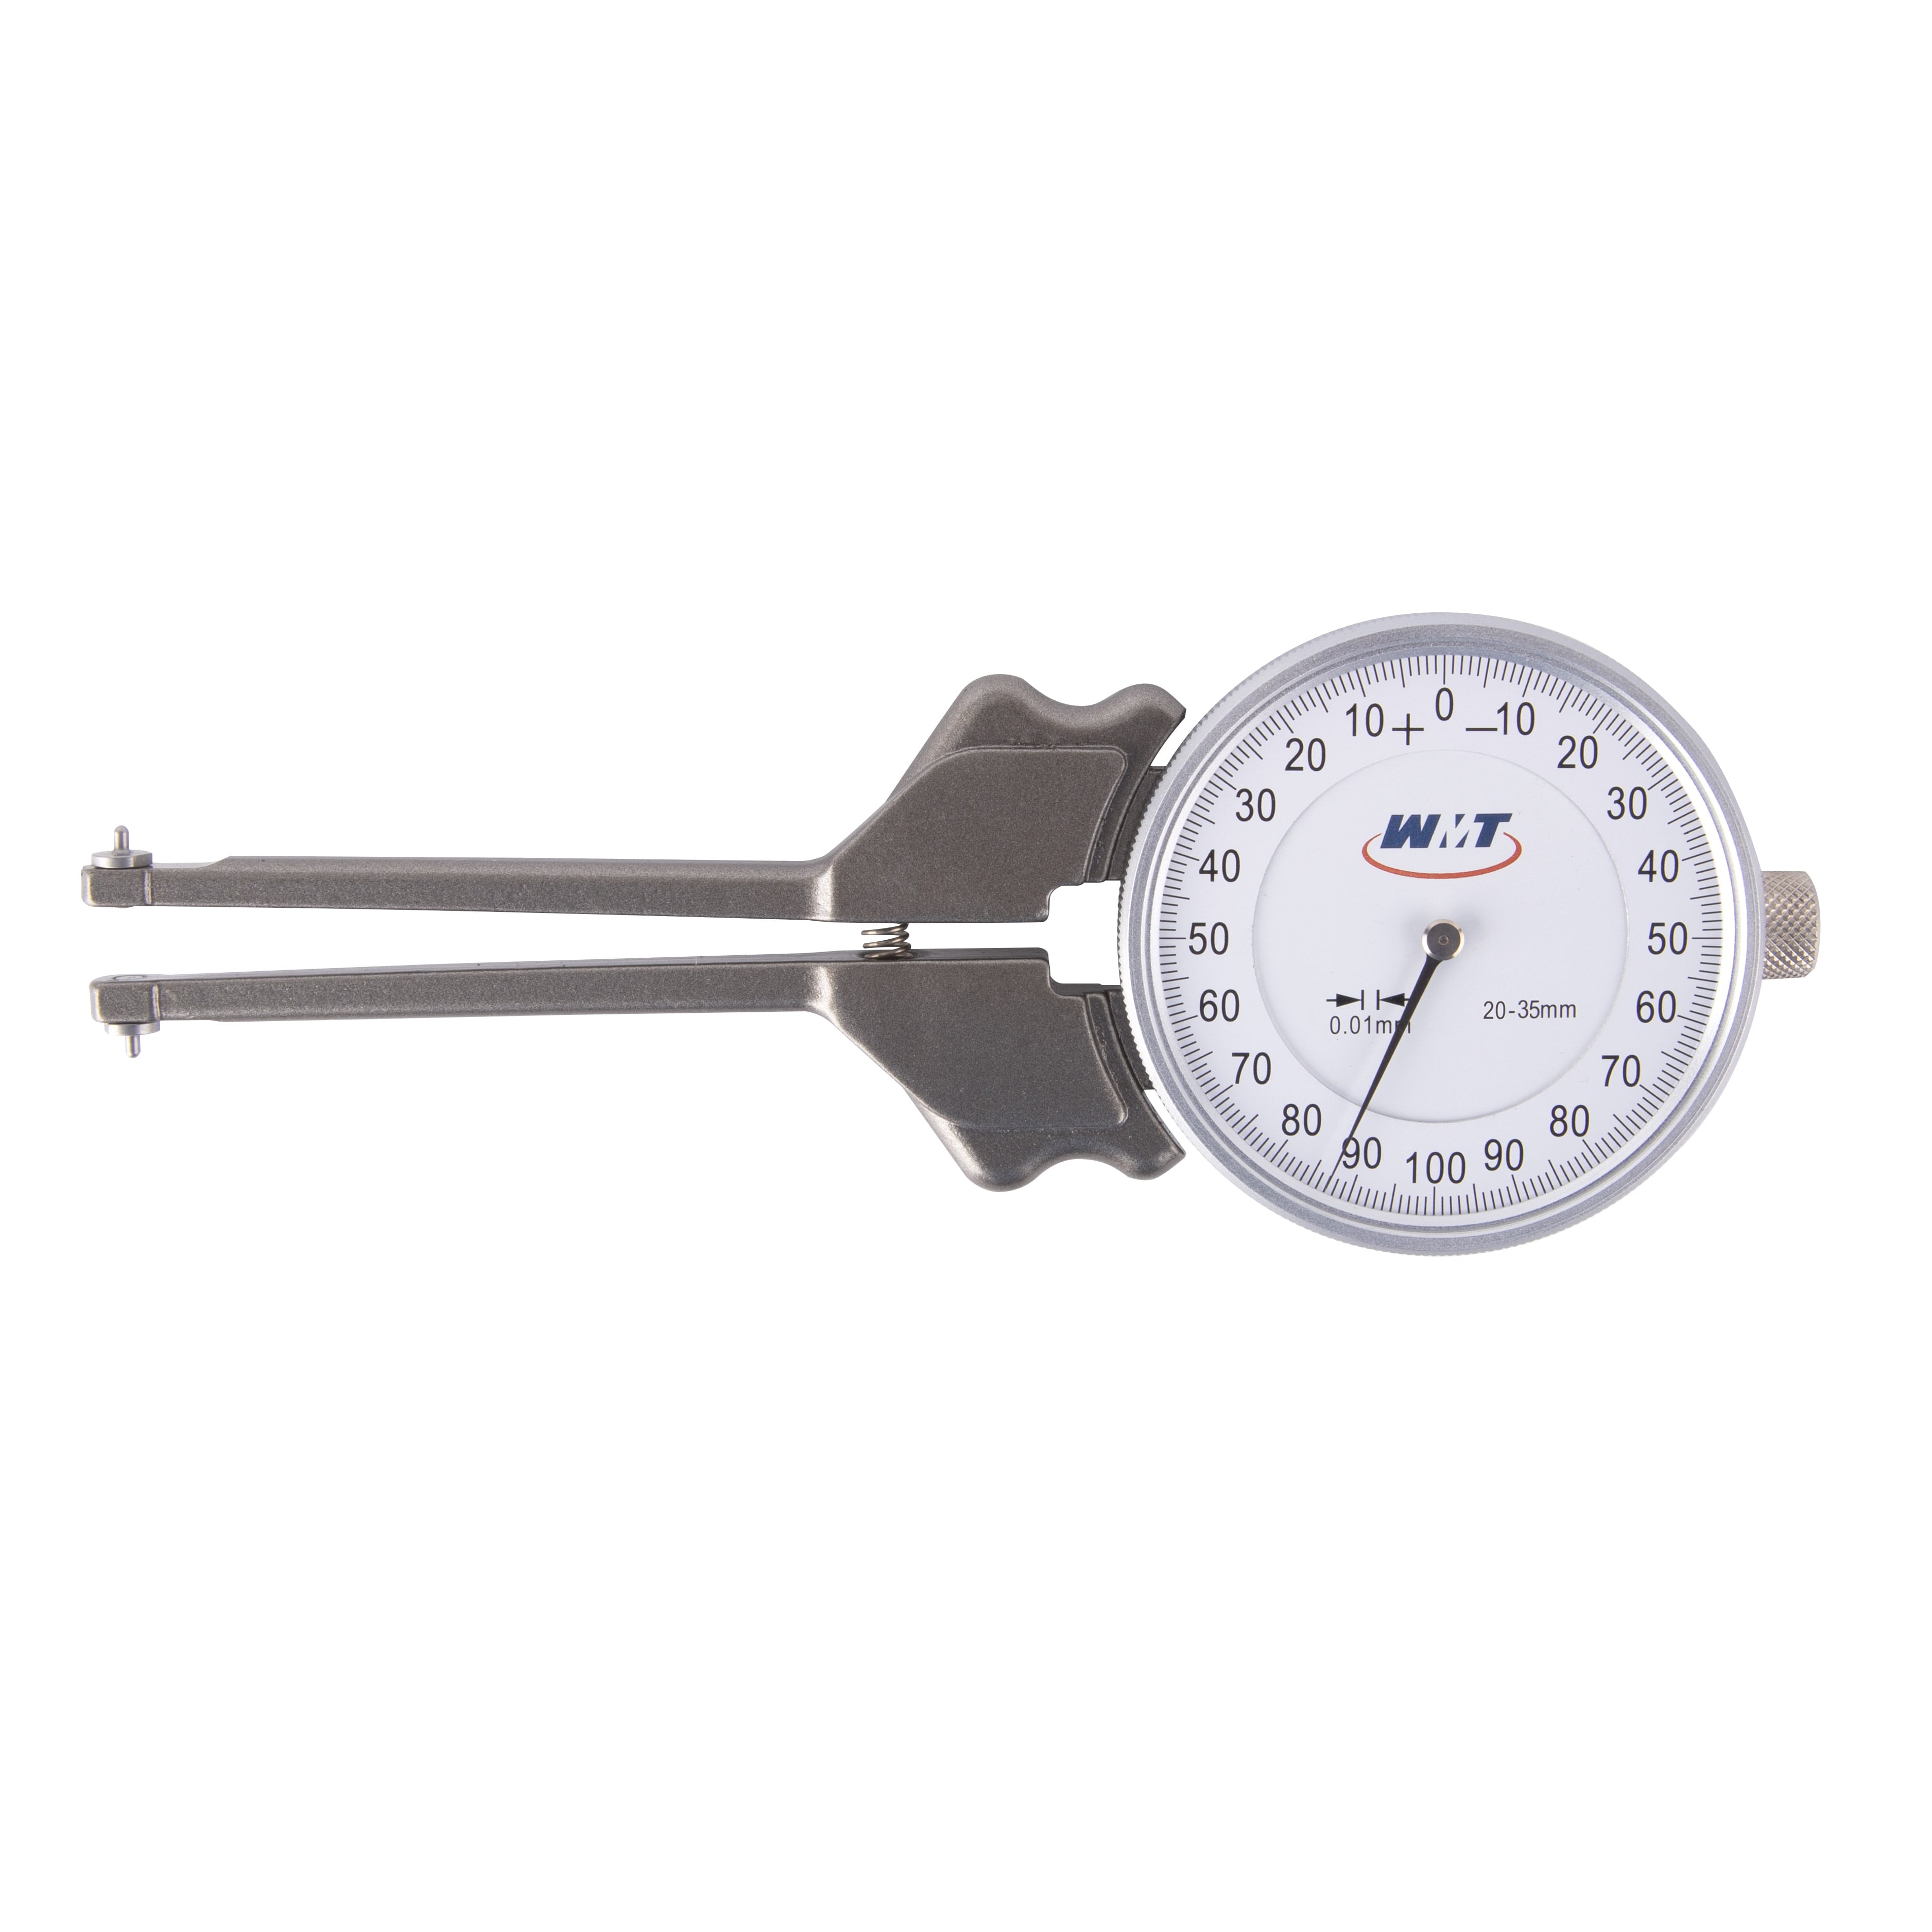 Inside Dial Caliper Gauges With Anvils515-103